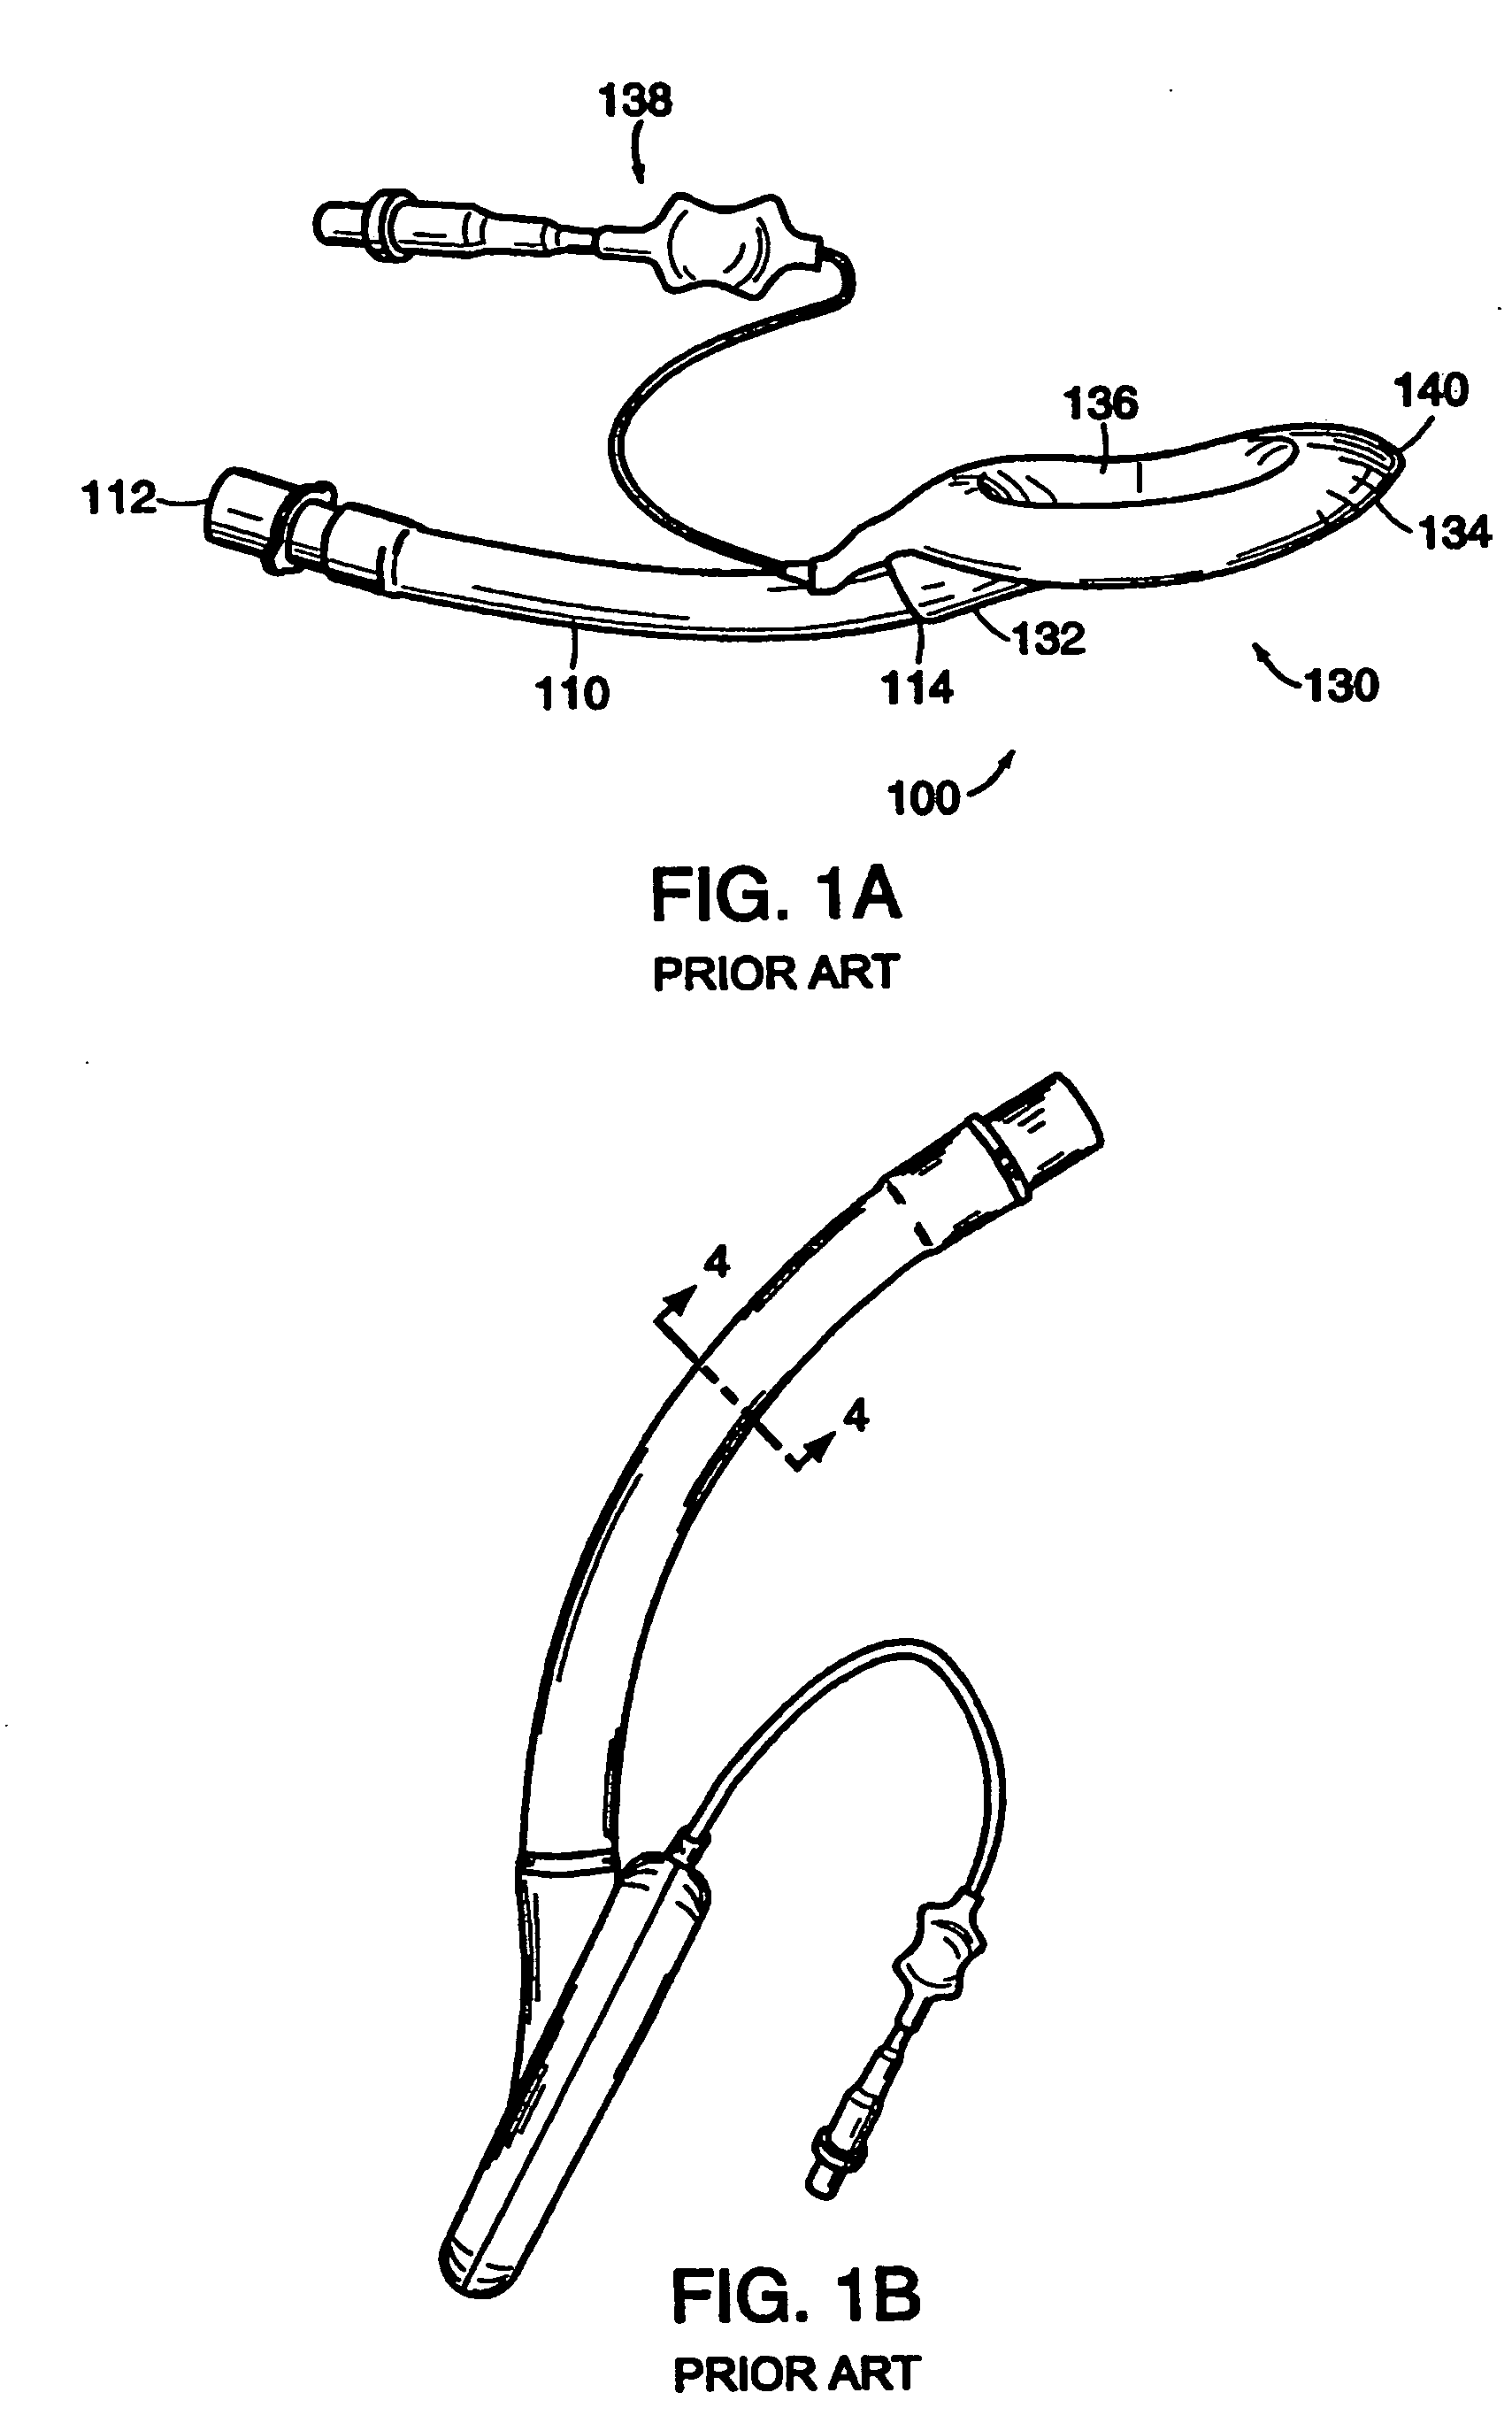 Laryngeal mask airway device with airway tube having flattened outer circumference and elliptical inner airway passage